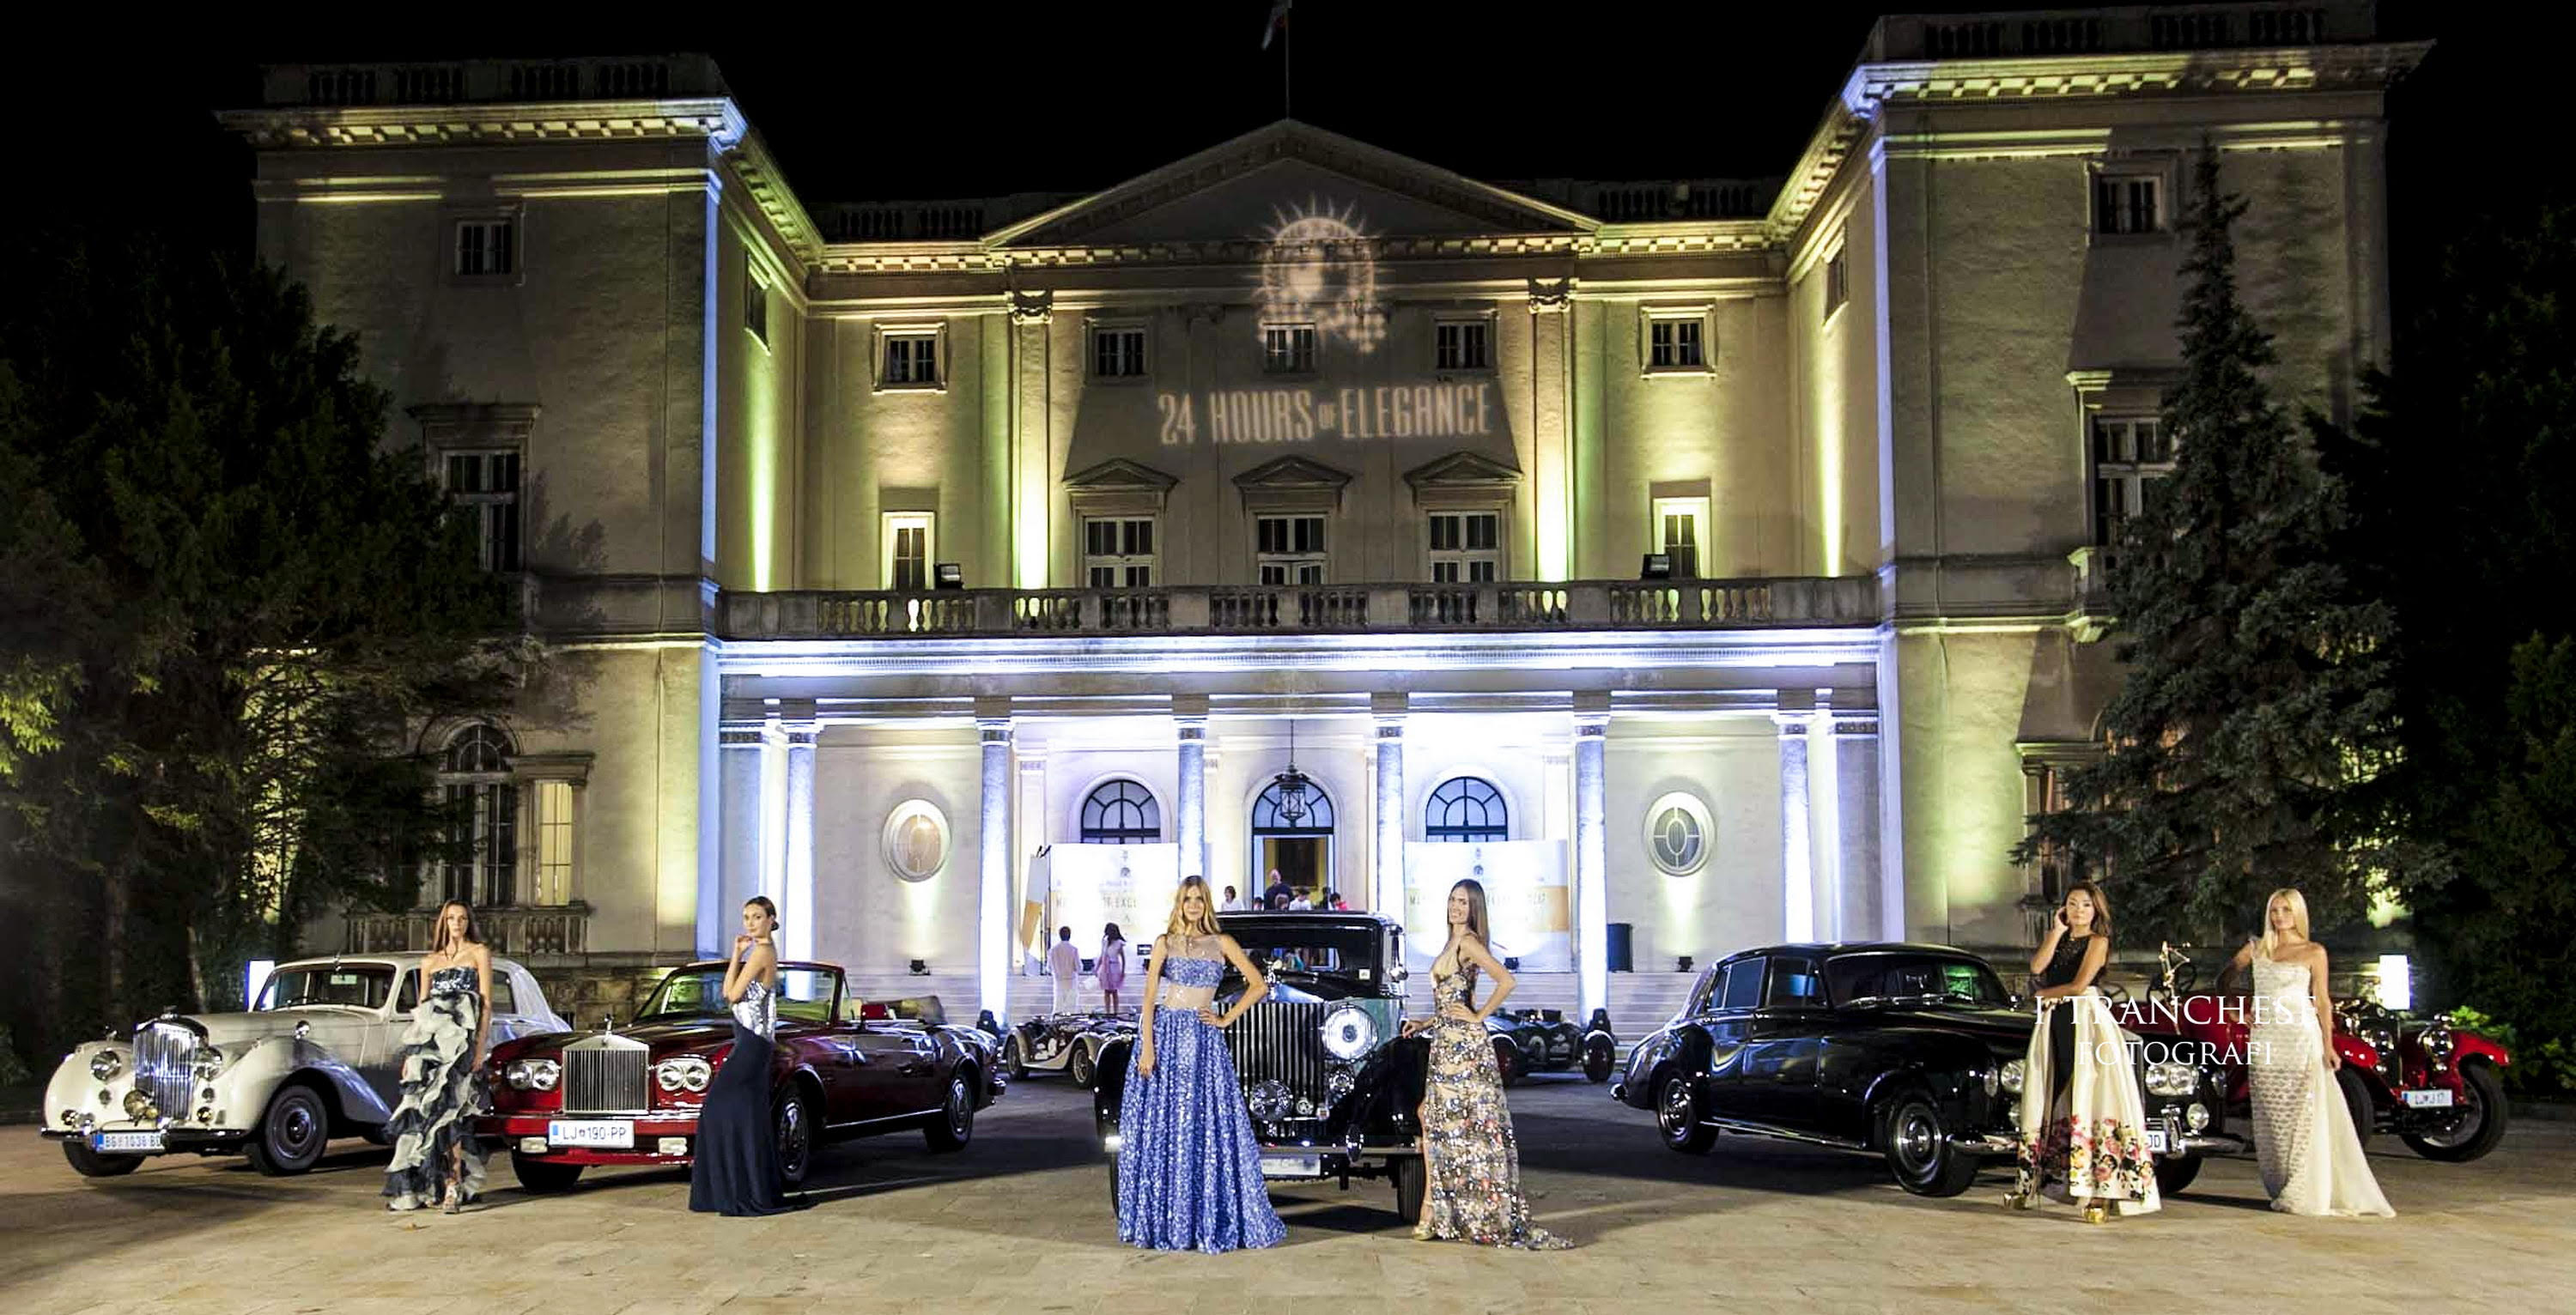 24 Hours of Elegance - Concours d’Elegance & Salon of Excellence